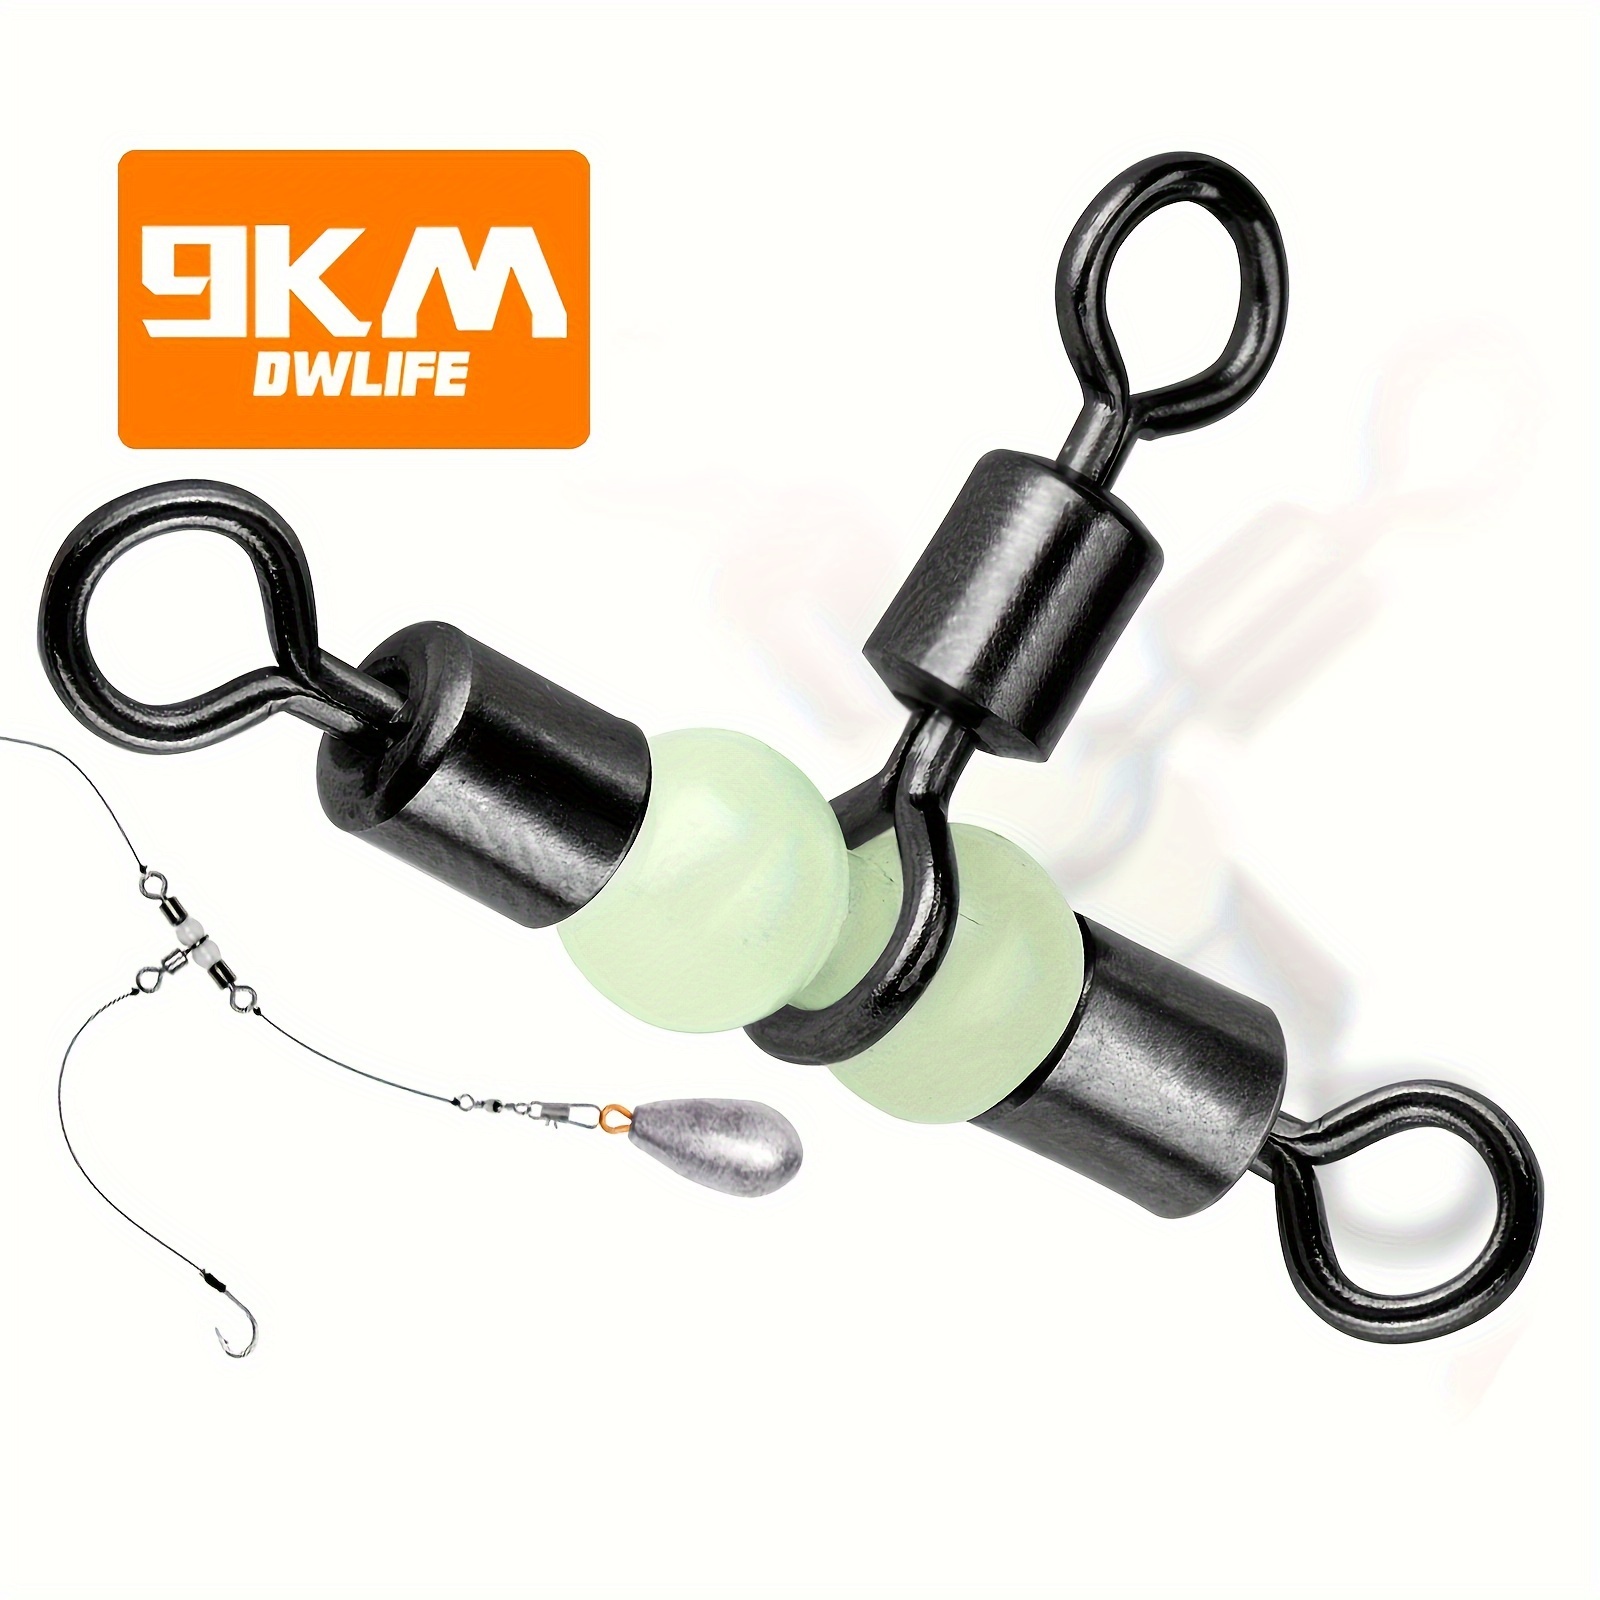 

9km 30pcs Heavy-duty Rolling T-shaped Swivel With Glow Bead, 3 Way Rigs Fishing Tackle Connector, Stainless Steel Swivels For Chasing Bottom Feeders